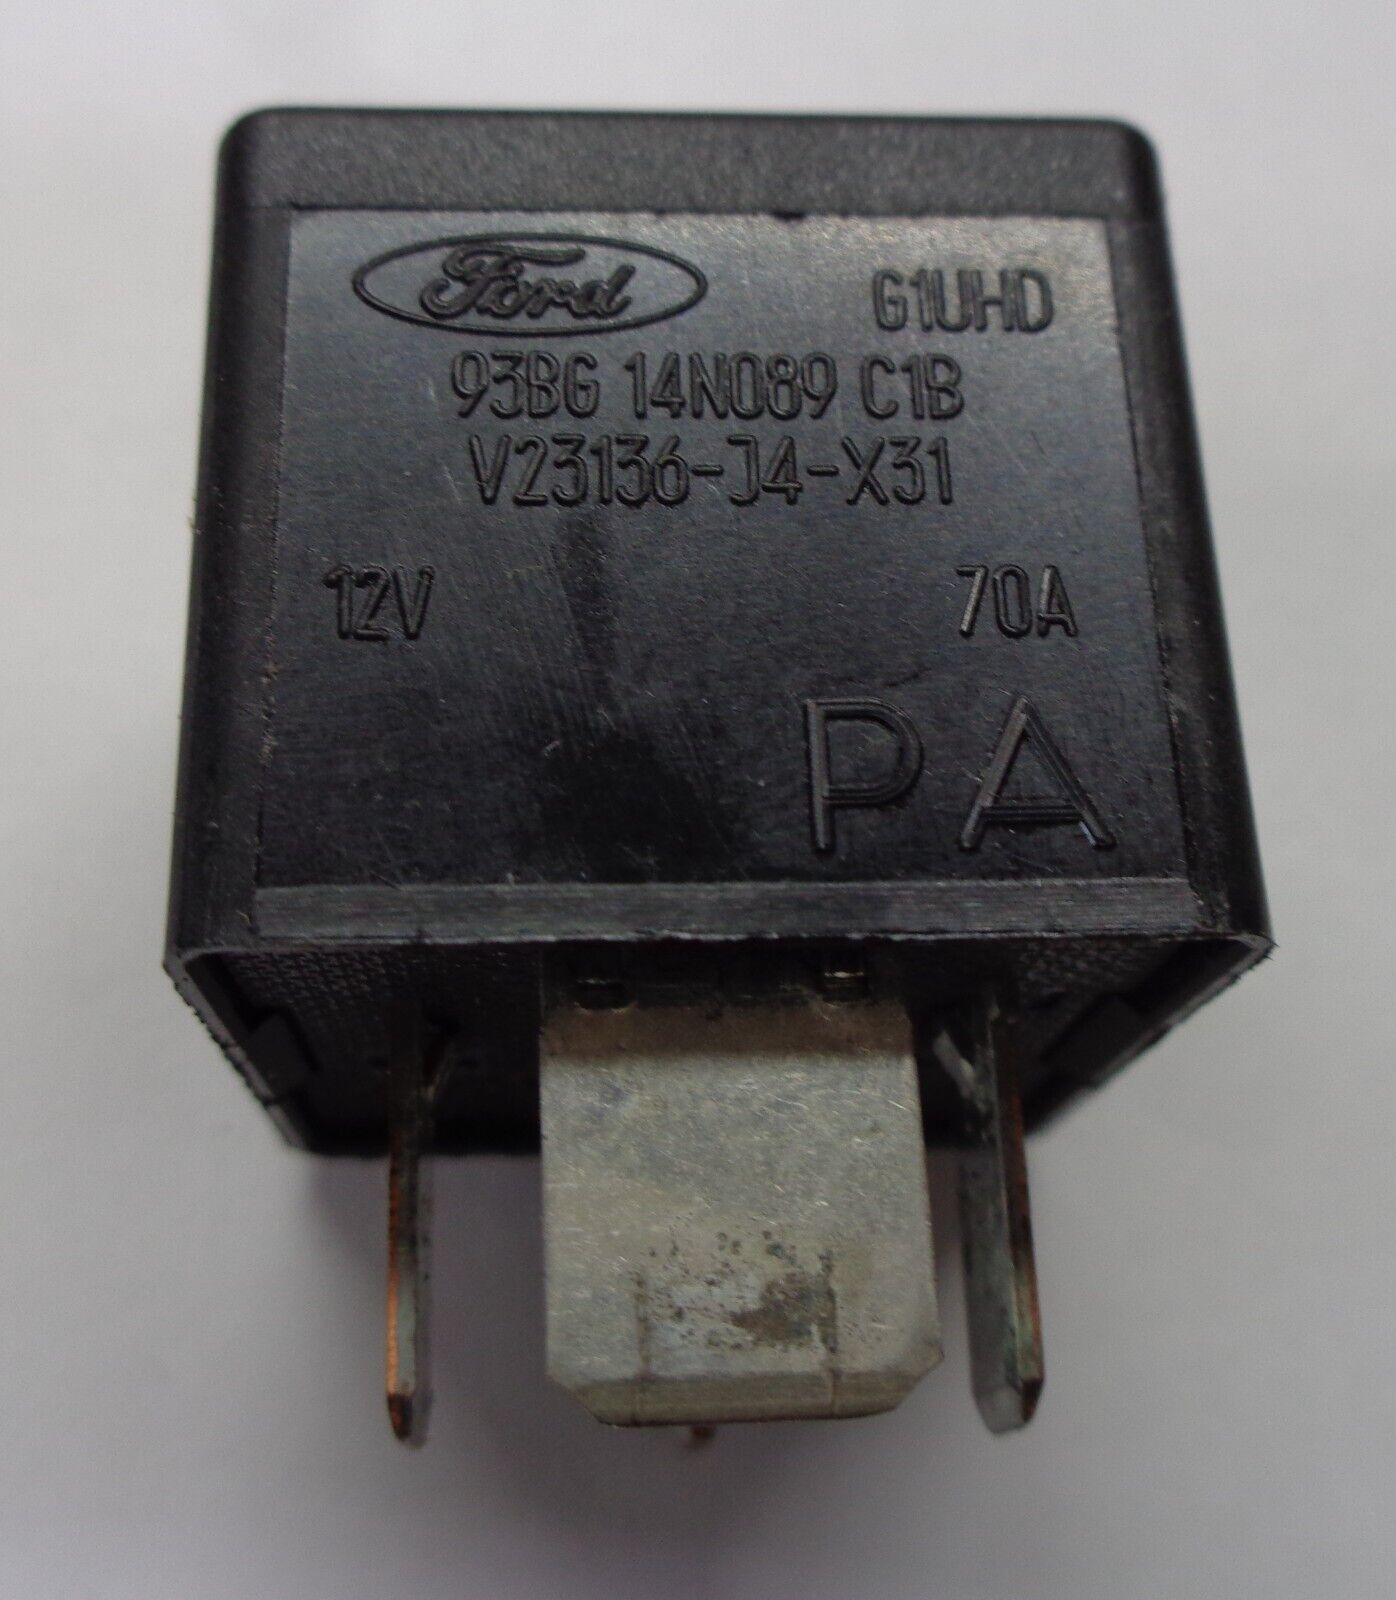 Primary image for FORD OEM 93BG-14N089-C1B RELAY TESTED 1 YEAR WARRANTY FREE SHIPPING F3